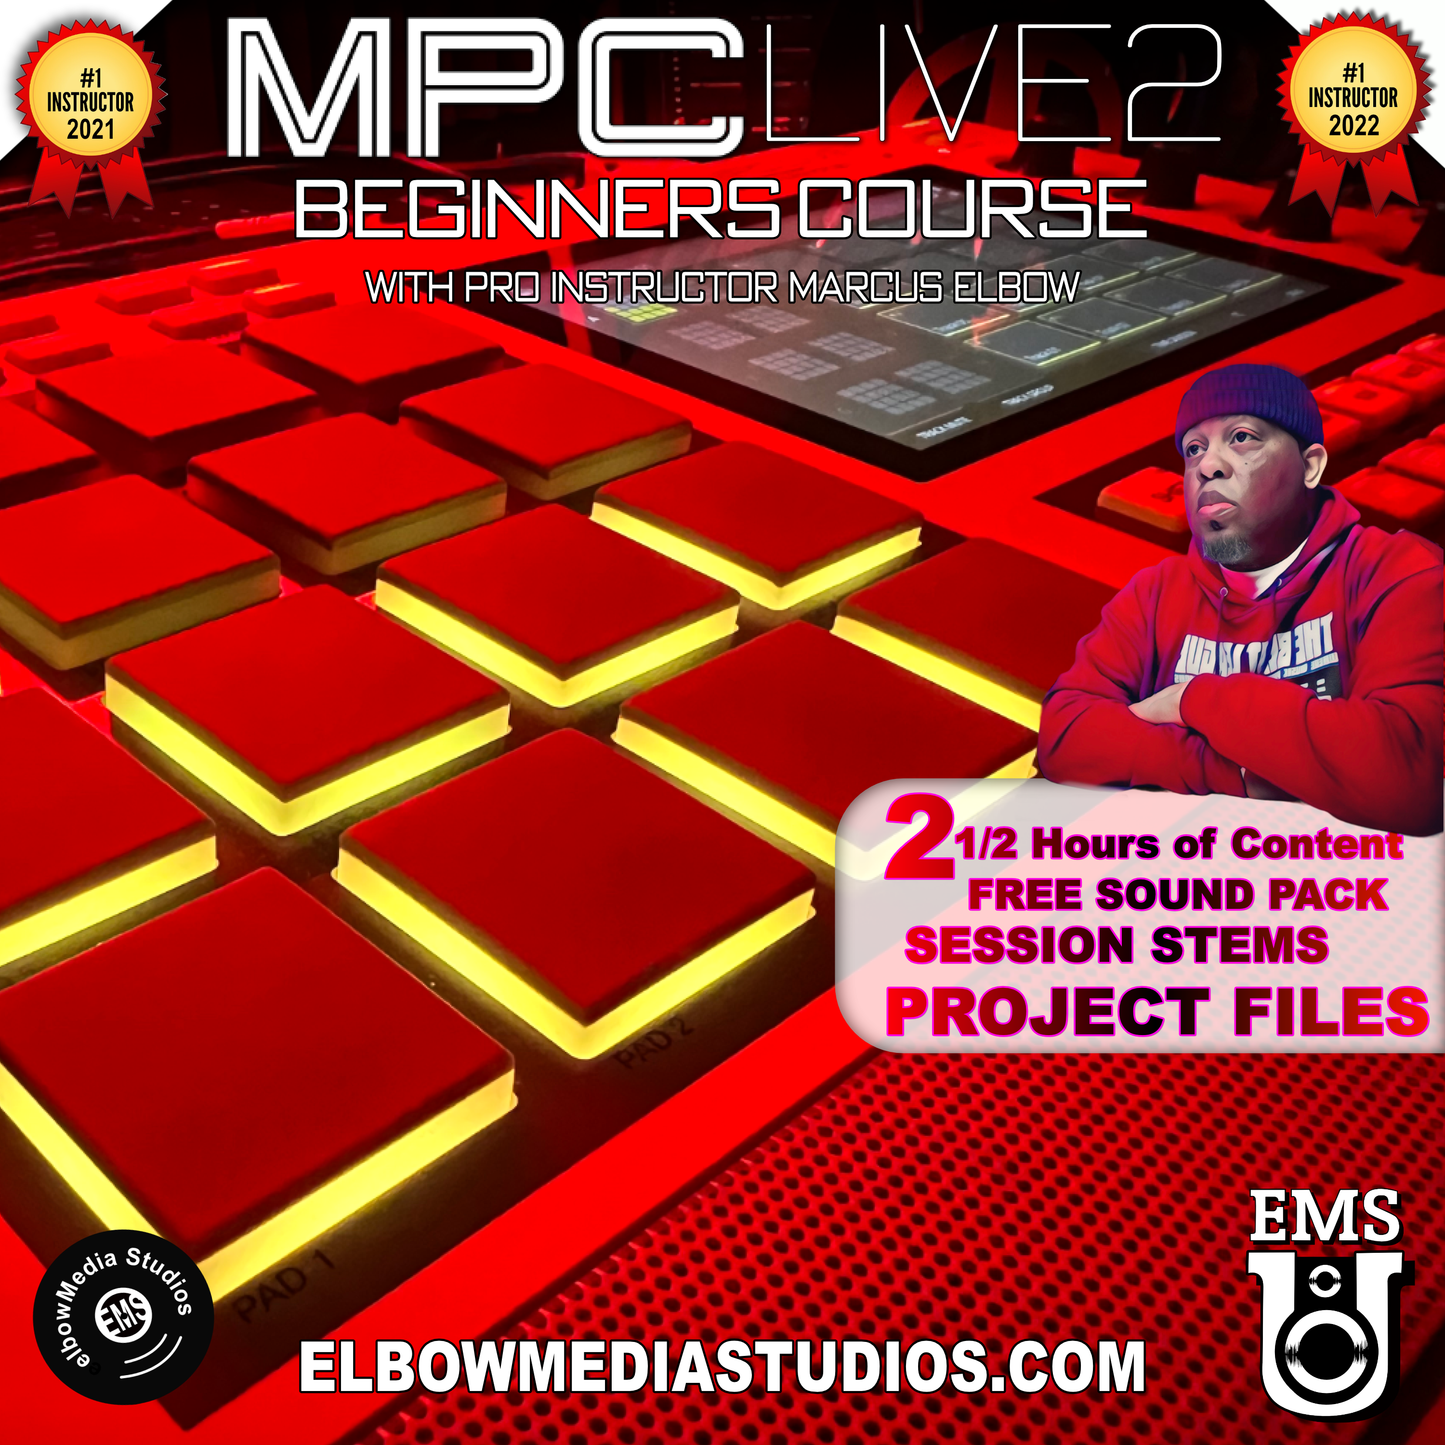 MPC LIVE 2 Beginners Course